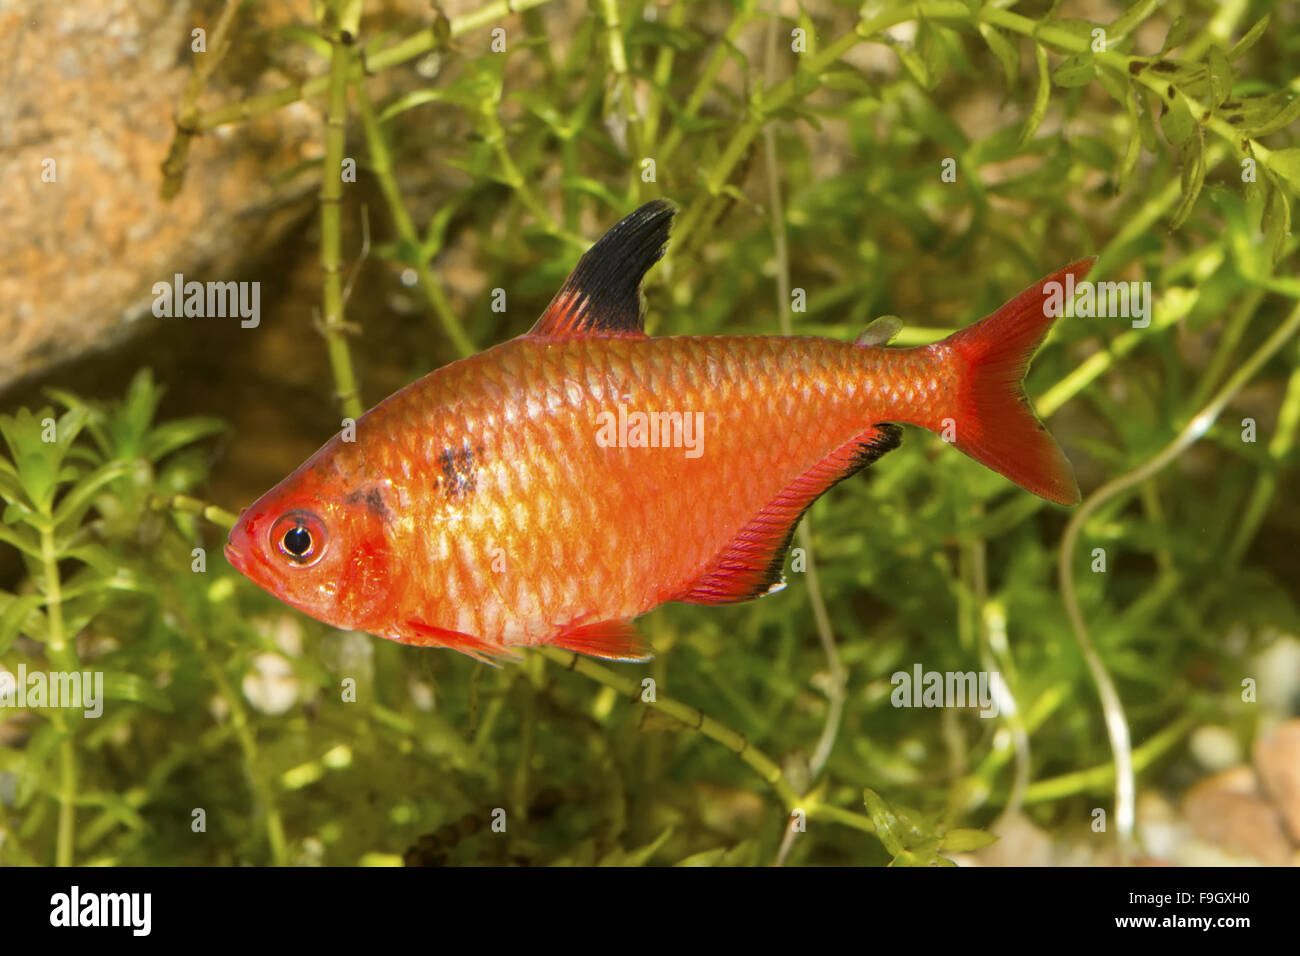 Red tetra fish in a aquarium with blurred background Stock Photo